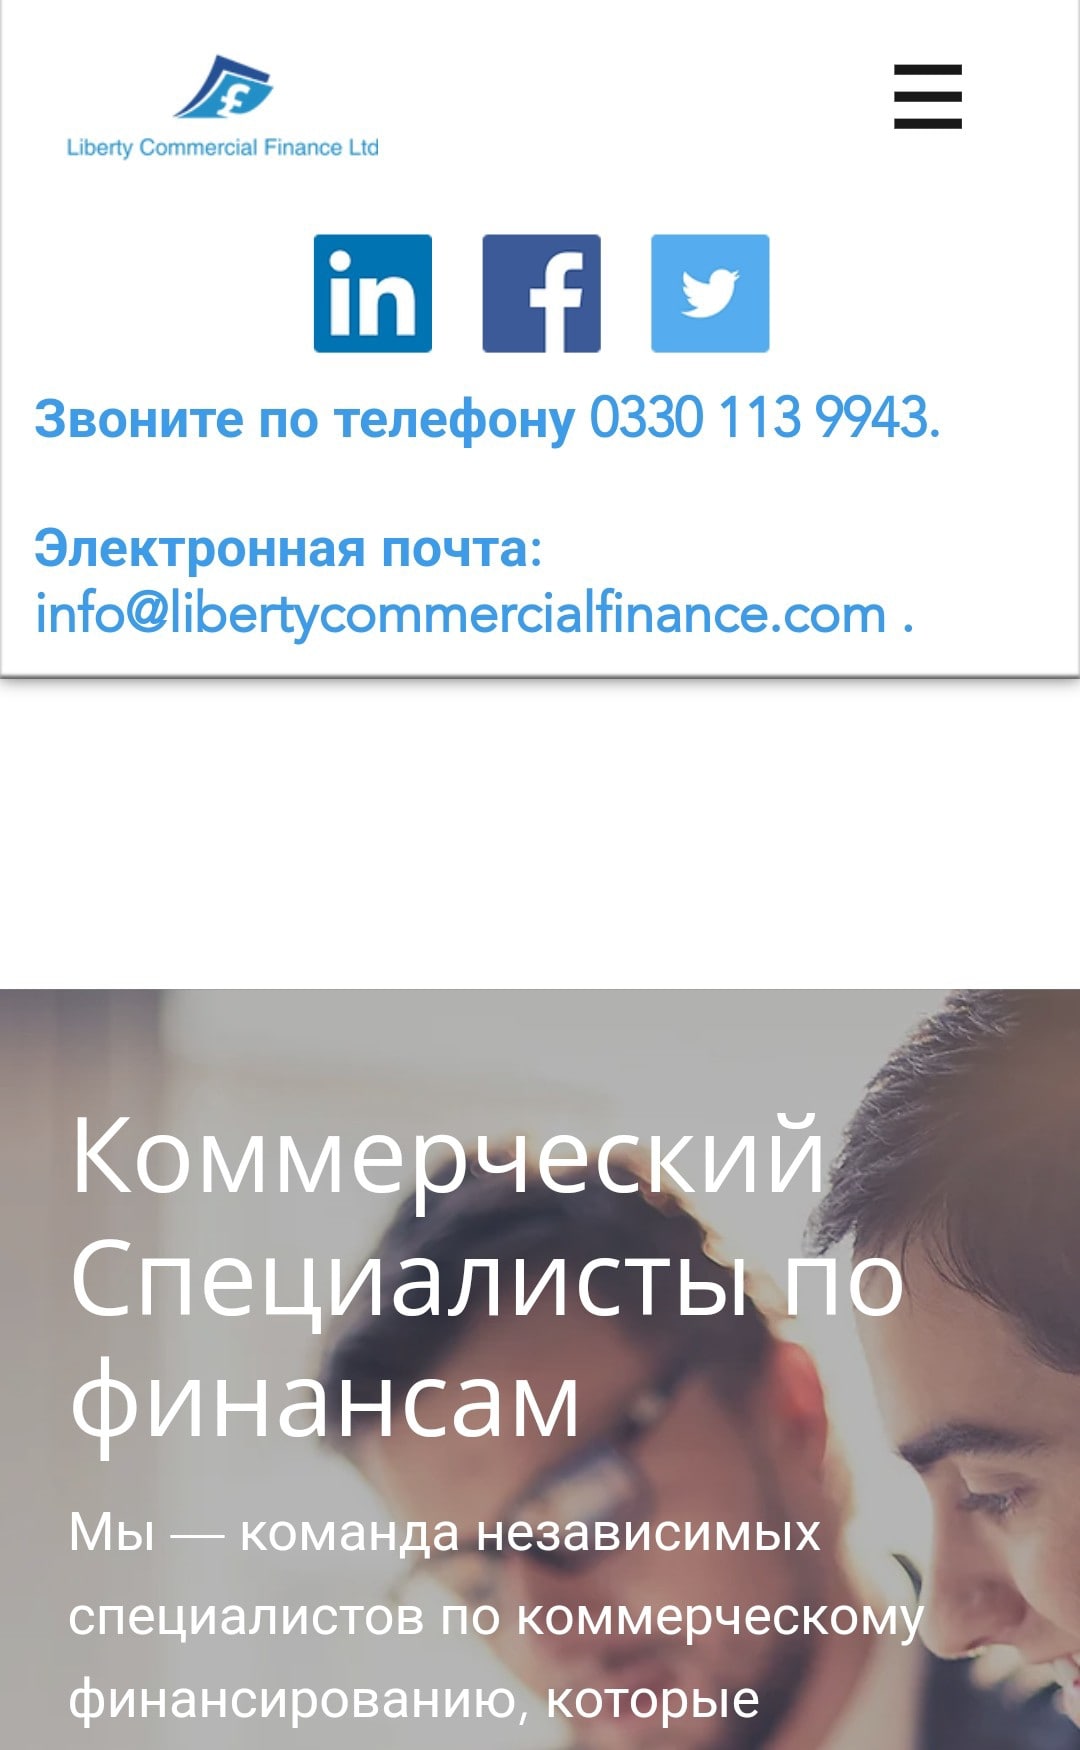 Liberty commercial finance limited сайт